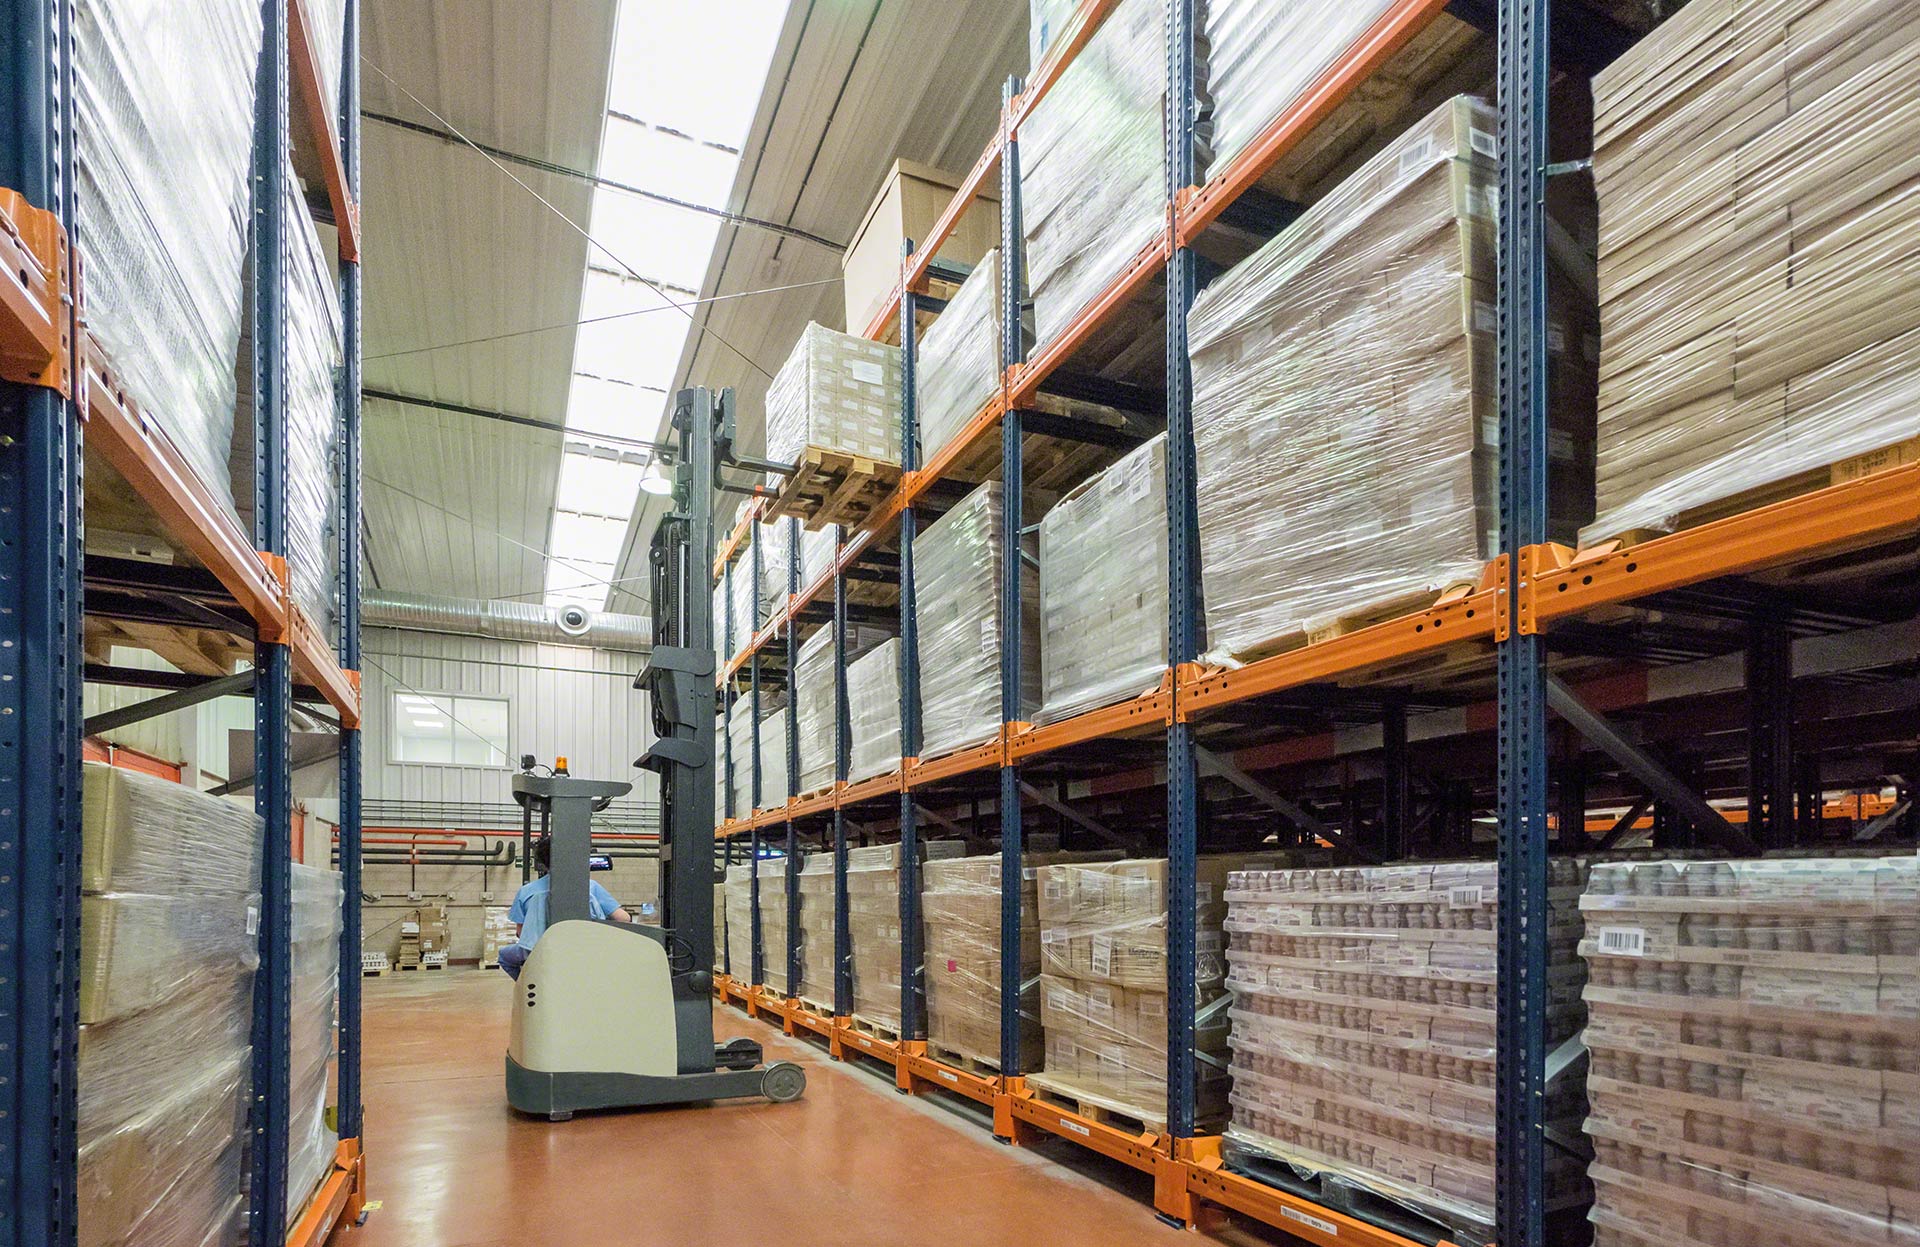 Push-back pallet racking increases safety in operations, as forklifts do not enter the racking